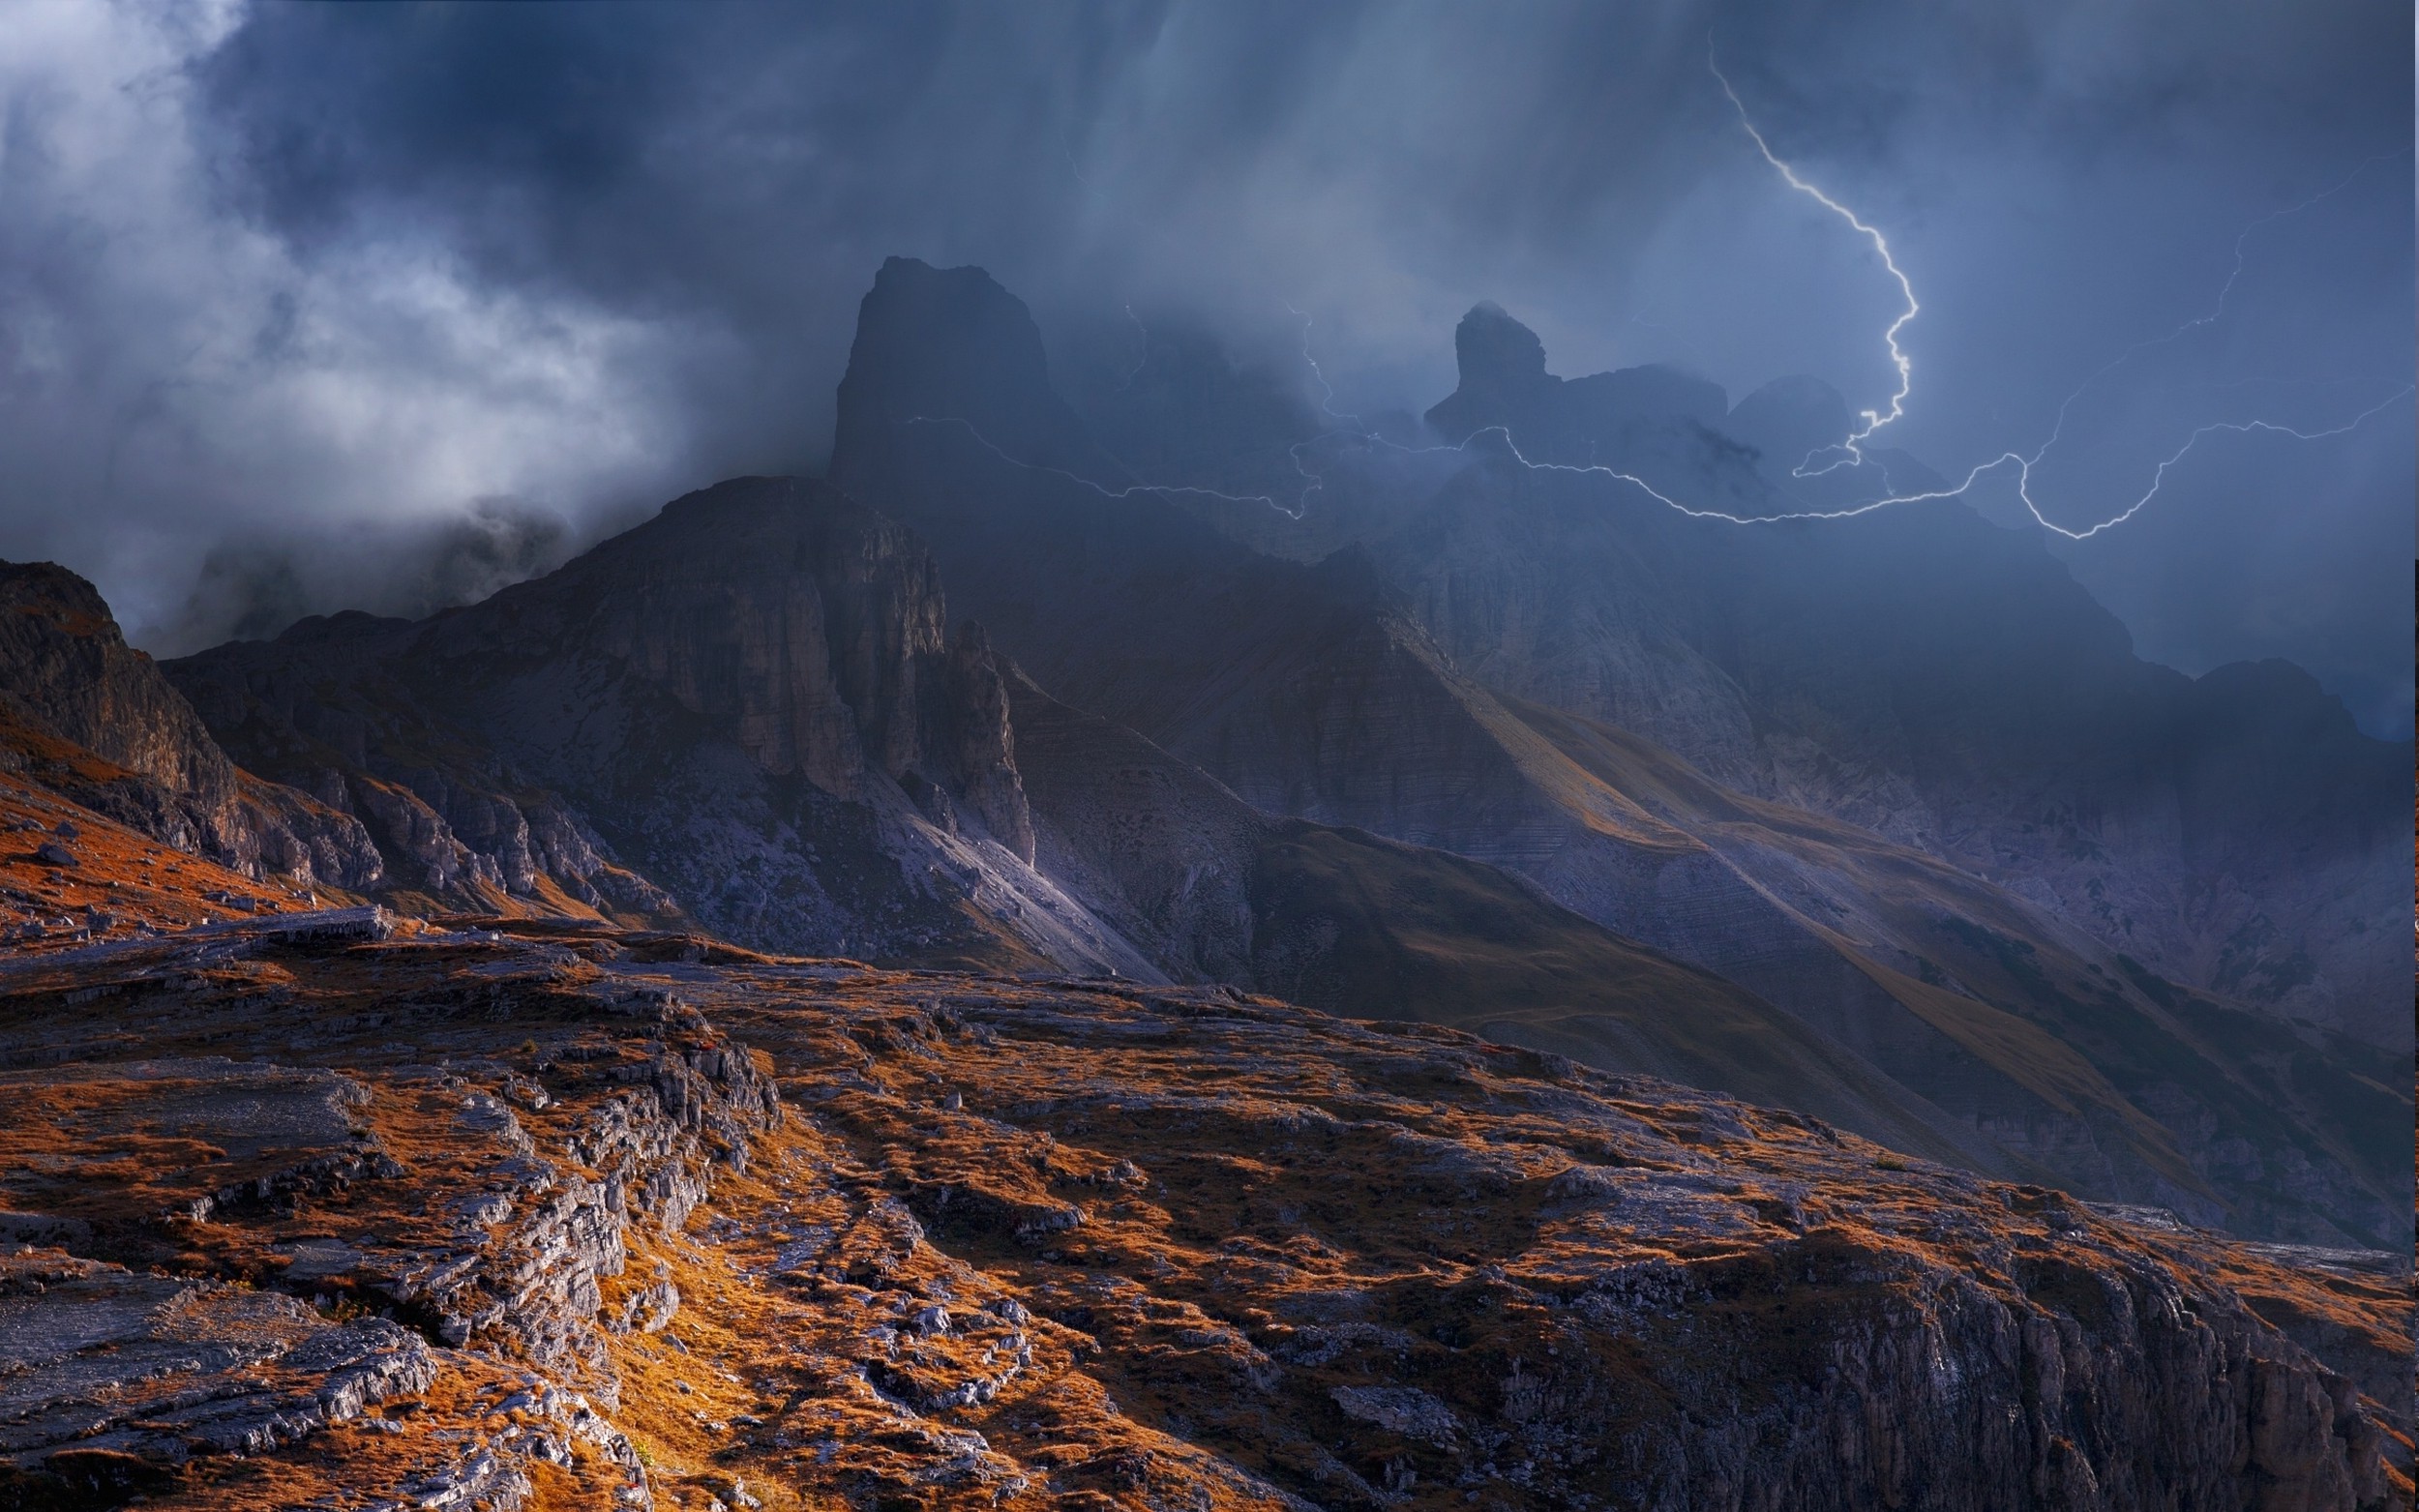 nature, Landscape, Mountain, Storm, Dolomites (mountains), Lightning, Clouds, Italy, Mist, Sky, Summer Wallpaper